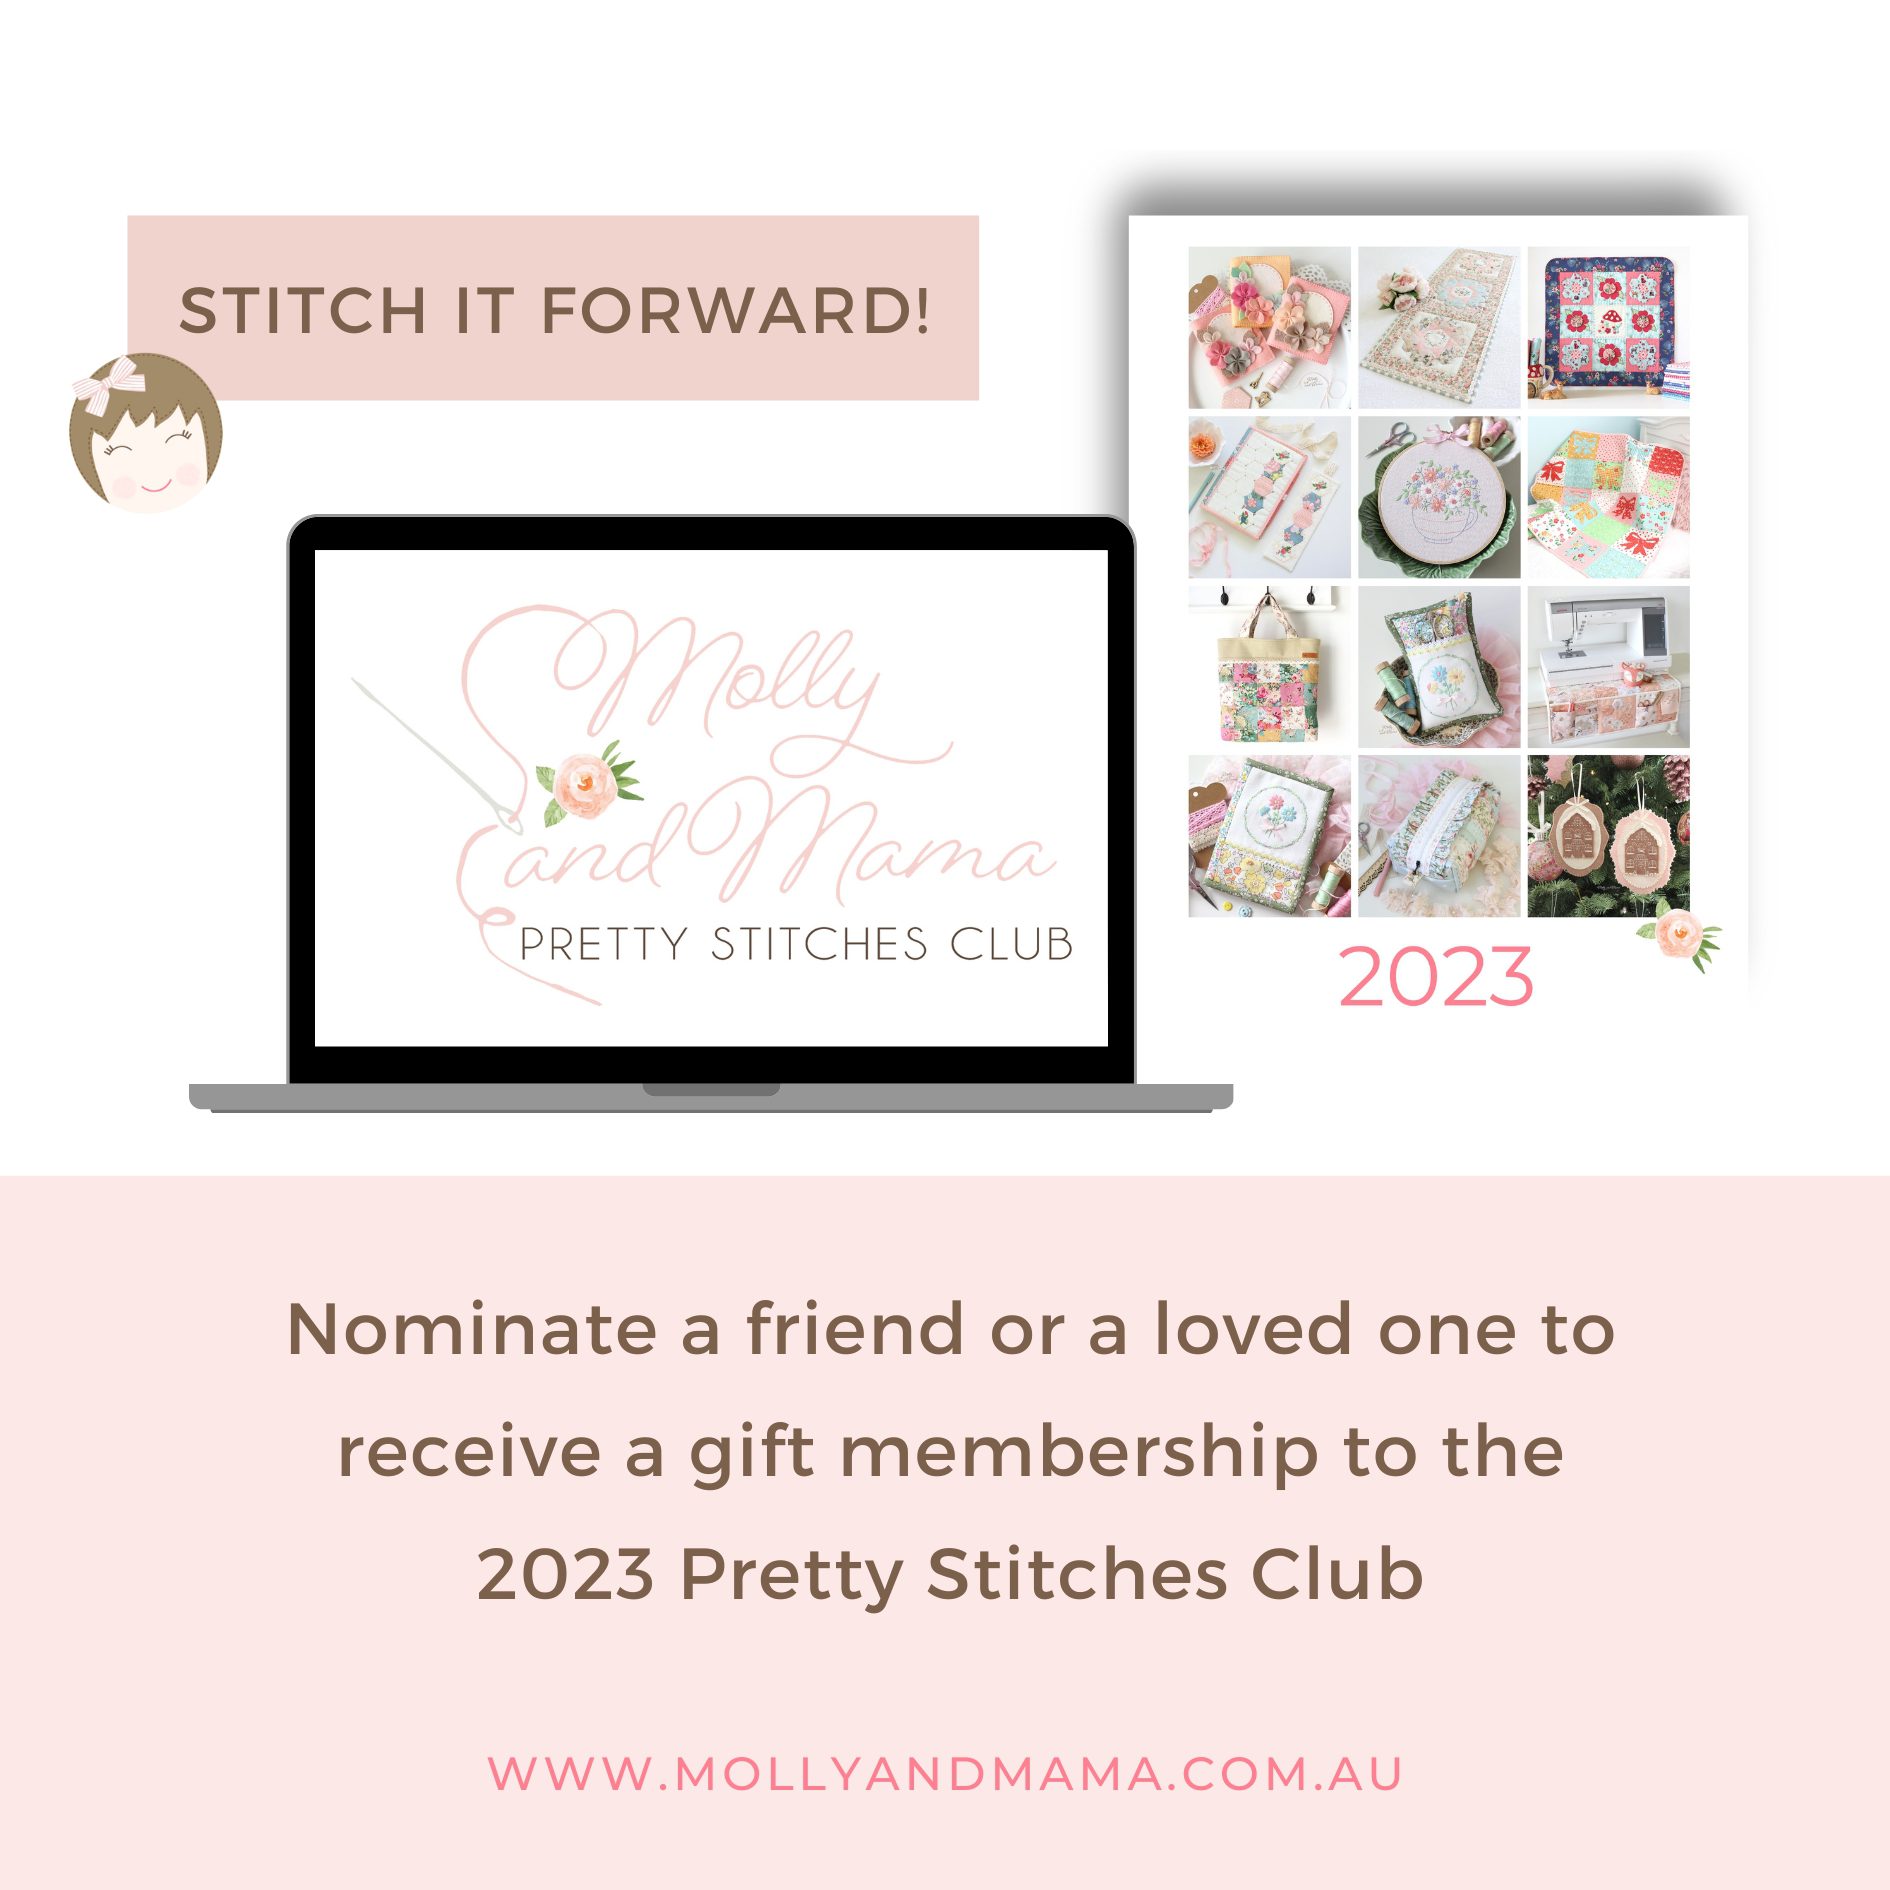 Stitch It Forward – Pretty Stitches Club Scholarships Now Available